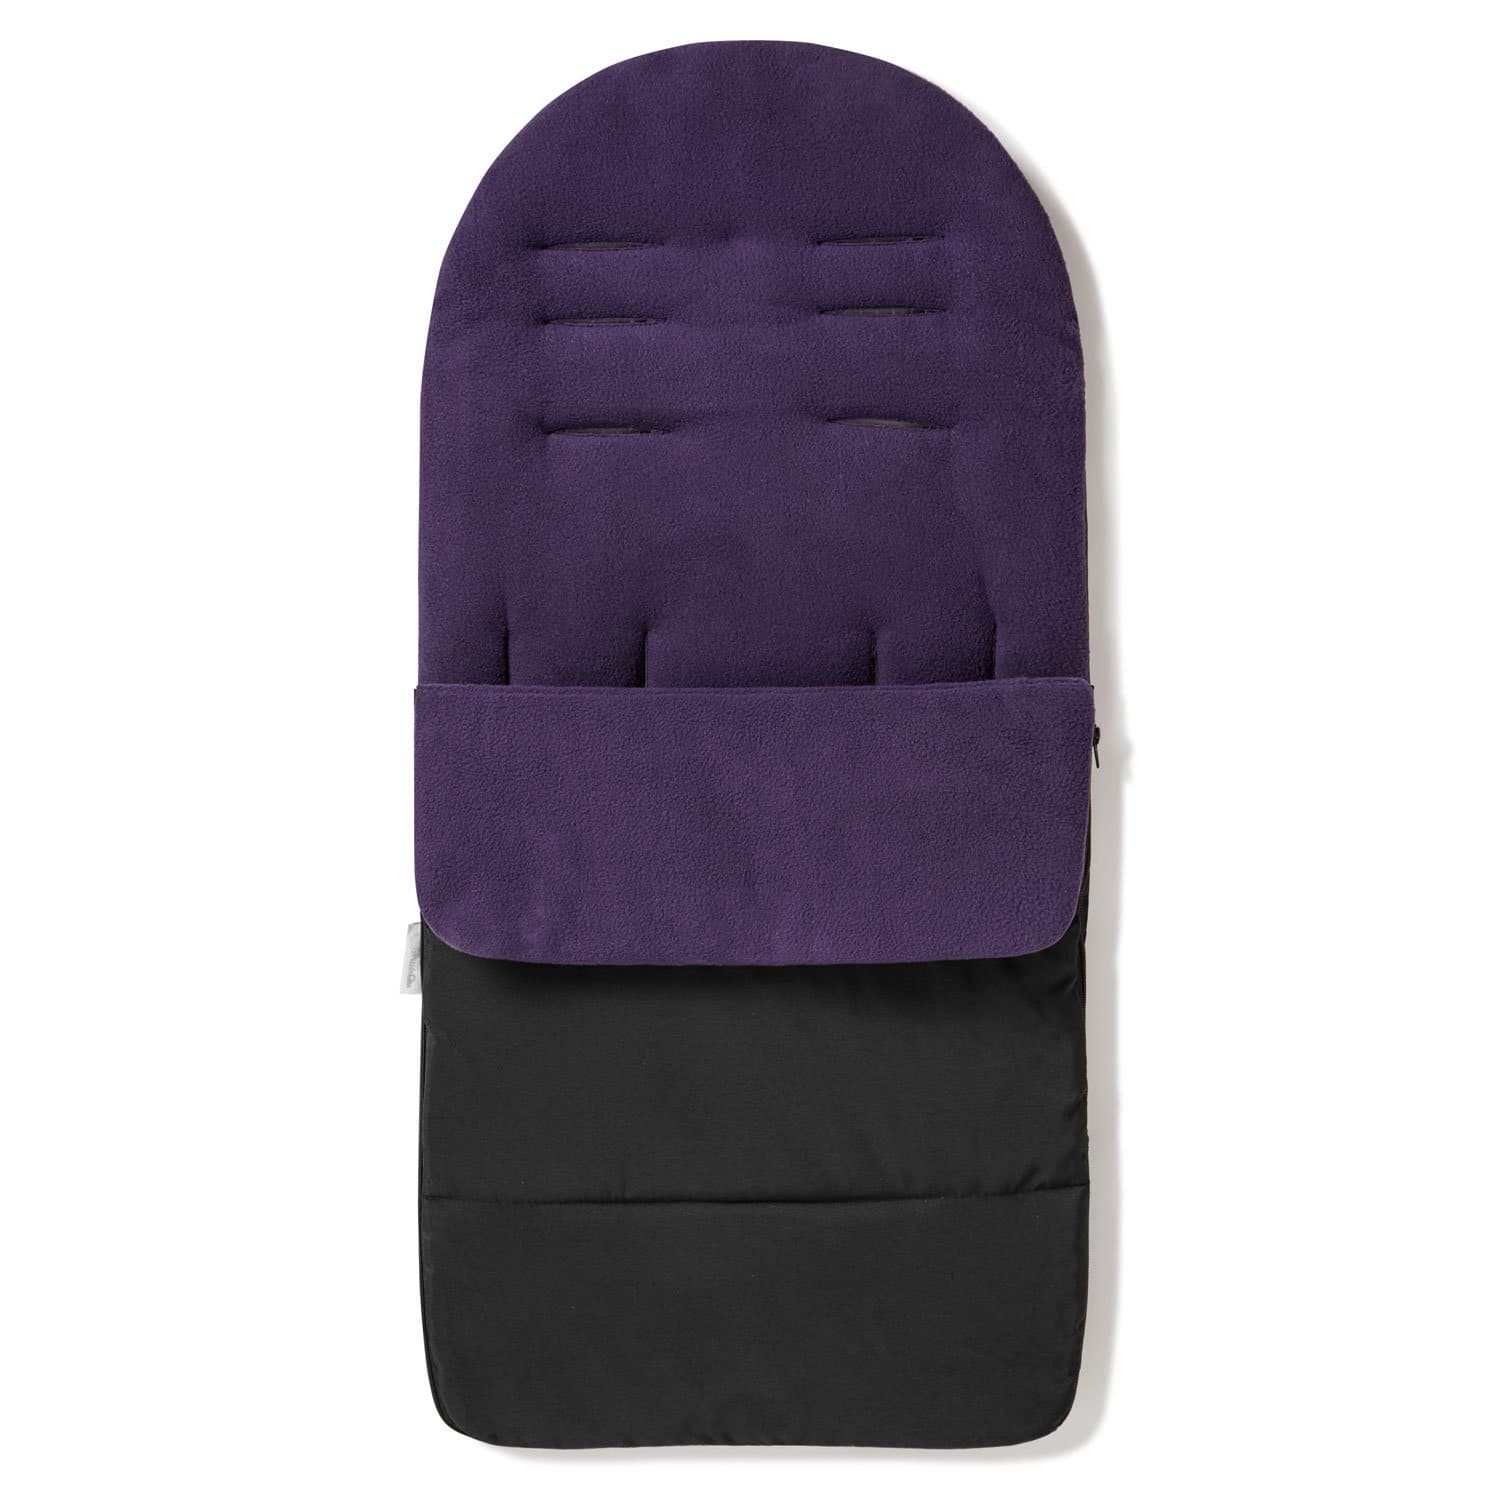 Premium Footmuff / Cosy Toes Compatible with Cam - Plum Purple / Fits All Models | For Your Little One